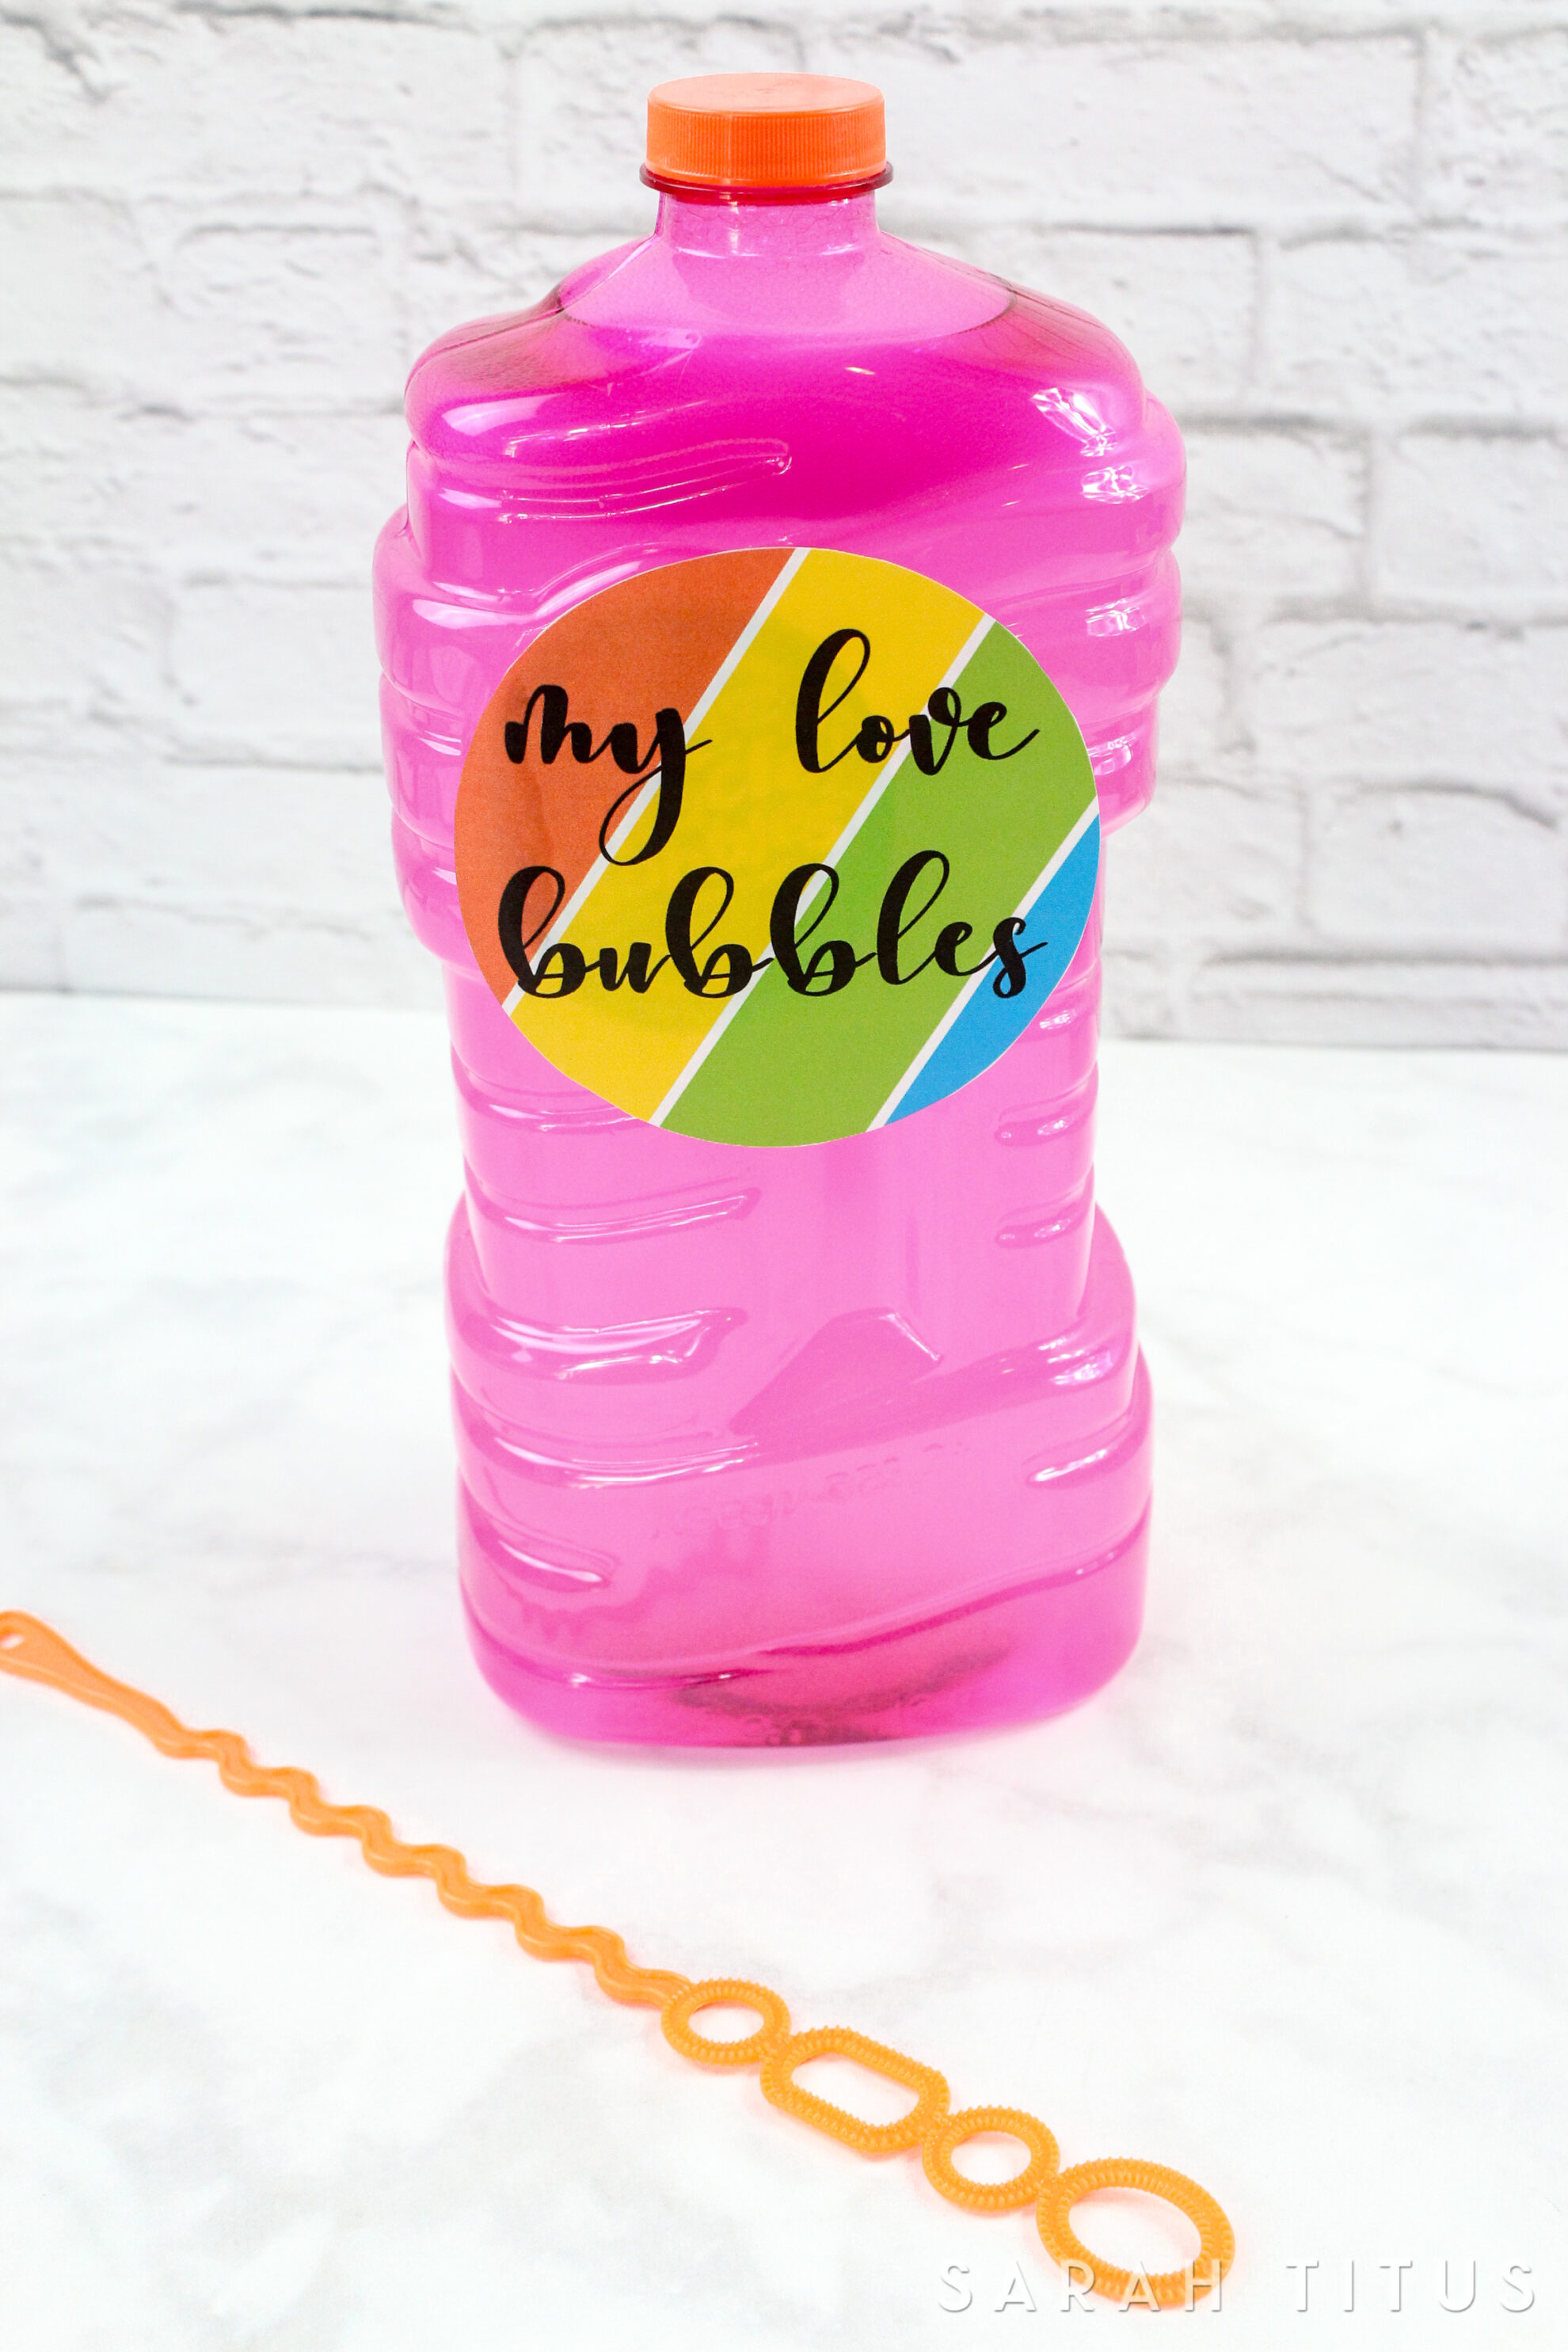 This Love Bubbles Gift Idea Free Printable is so simple but also so fulfilling. Children love and enjoy playing with bubbles so much. Plus it’s a cool and fun activity for all year around!